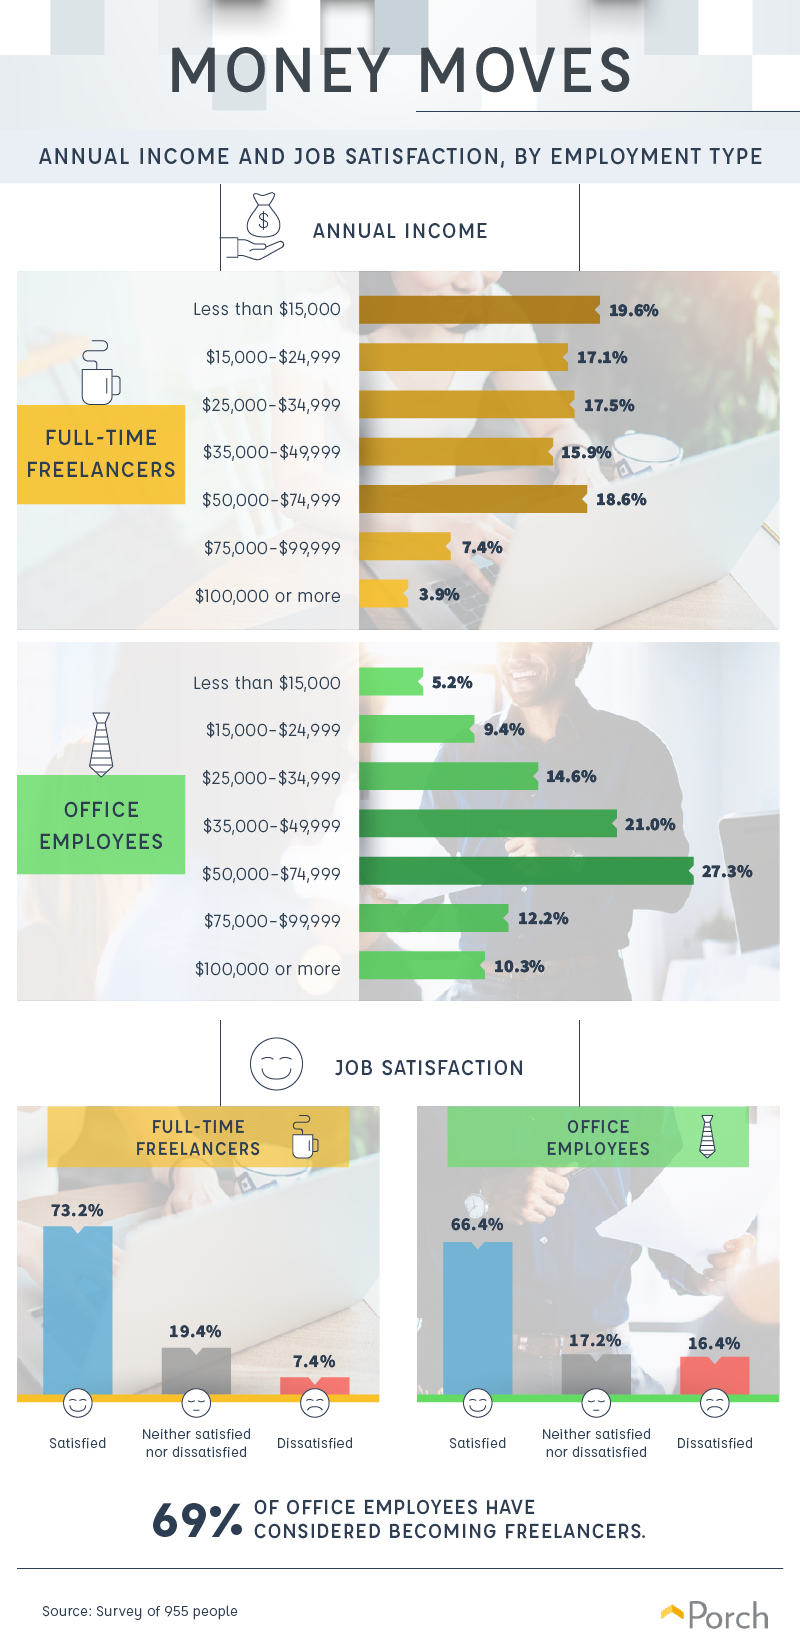 Annual Income and Job Satisfaction, by Employment Type